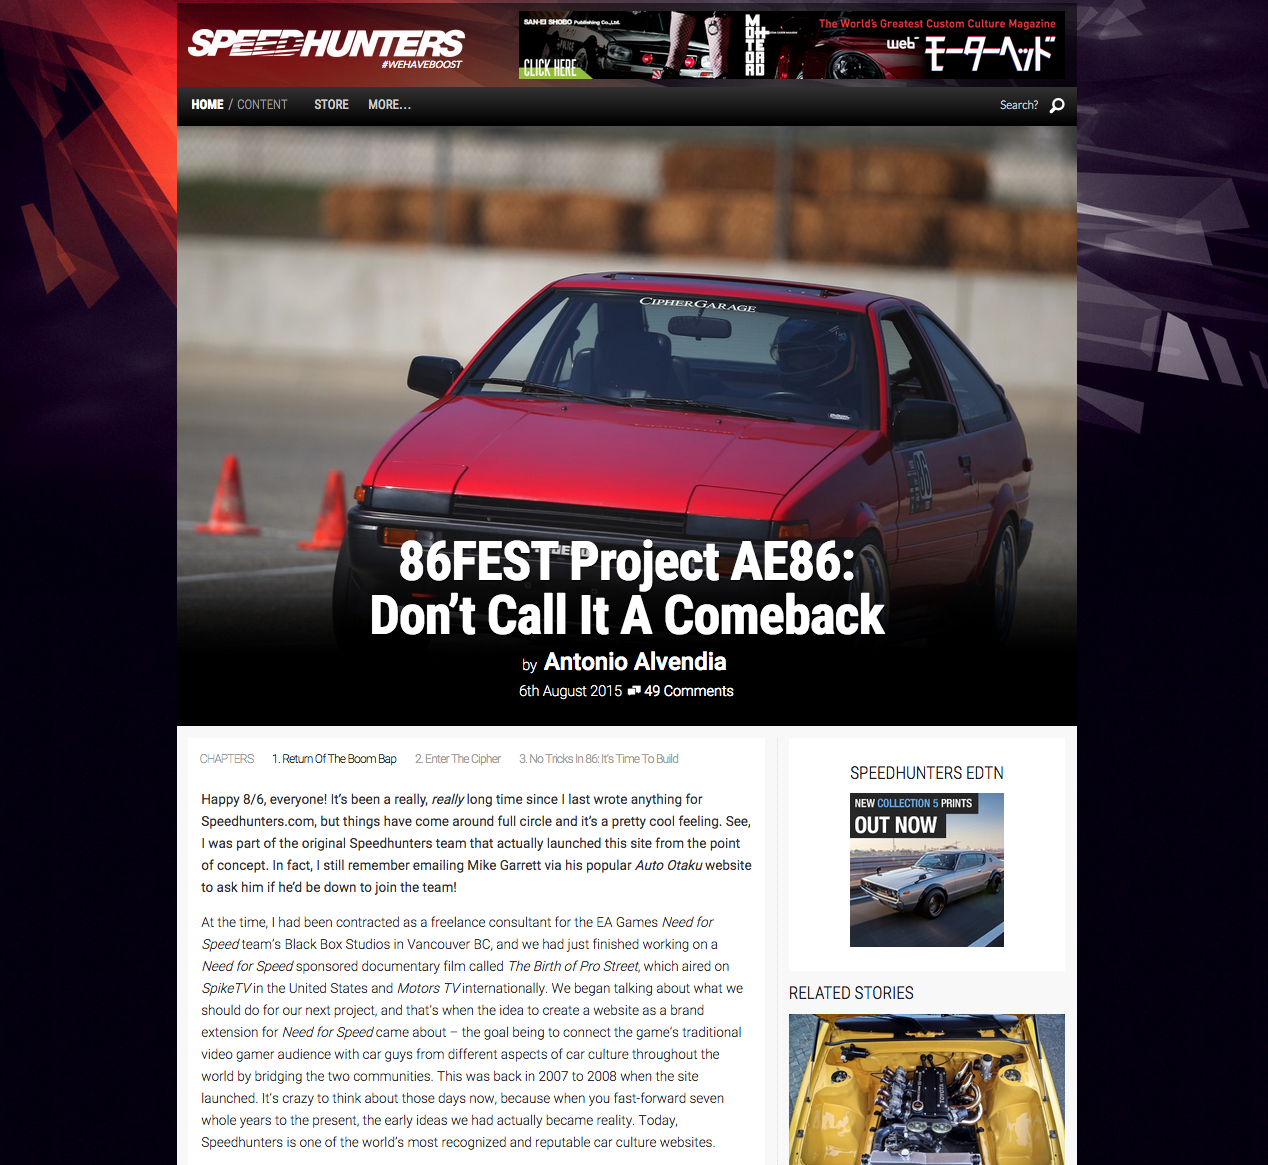 86FEST Project AE86 on Speedhunters